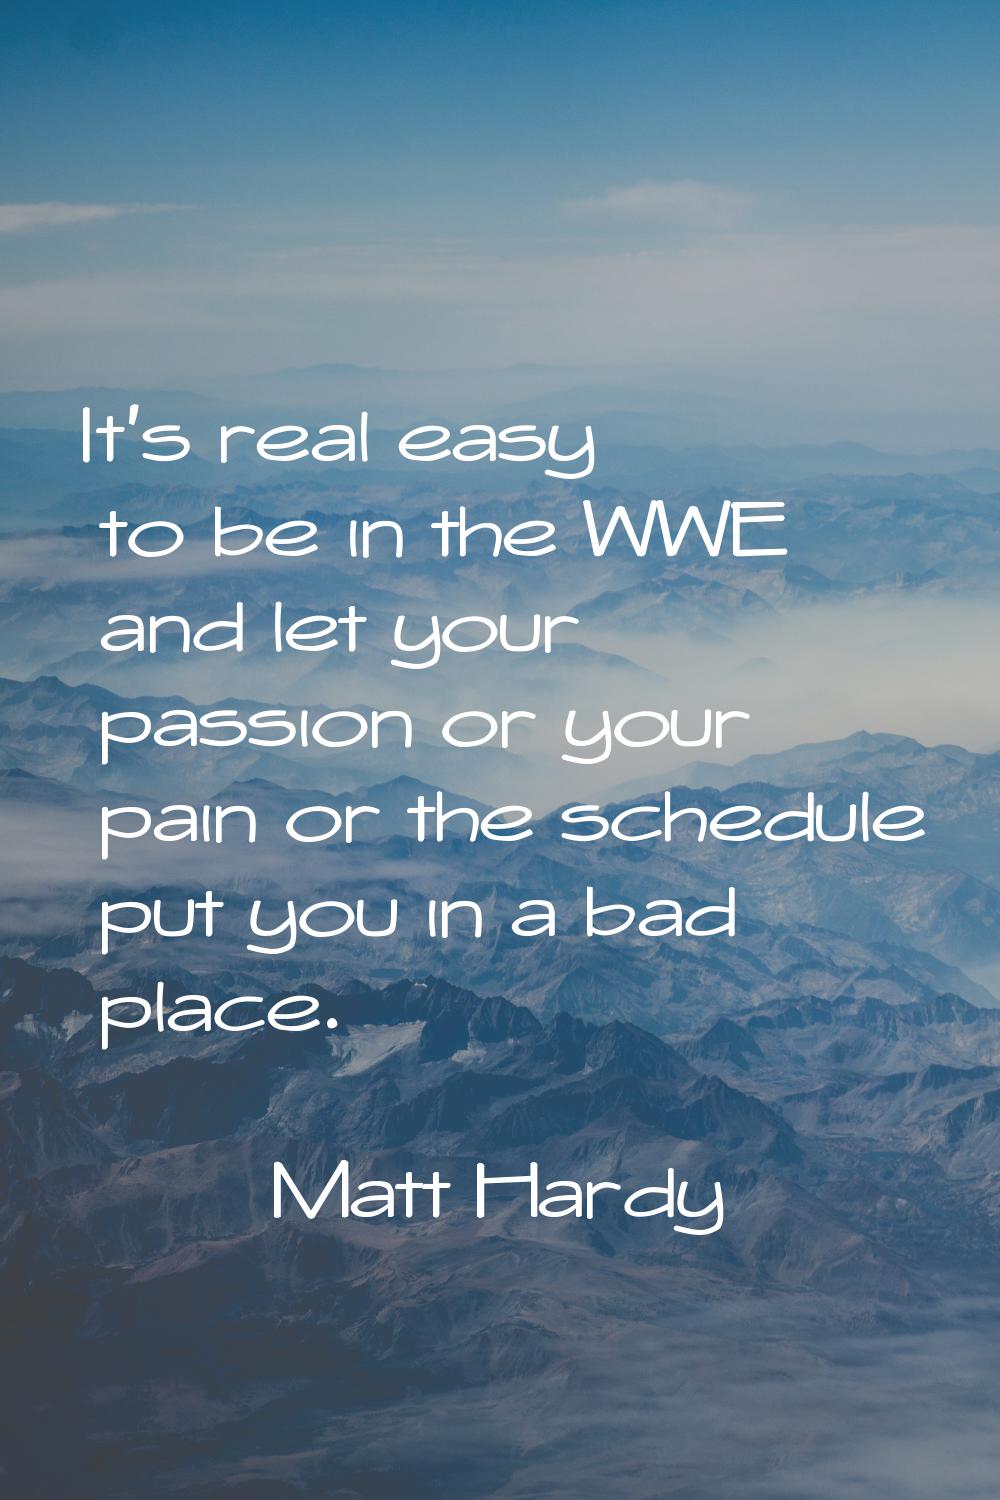 It's real easy to be in the WWE and let your passion or your pain or the schedule put you in a bad 